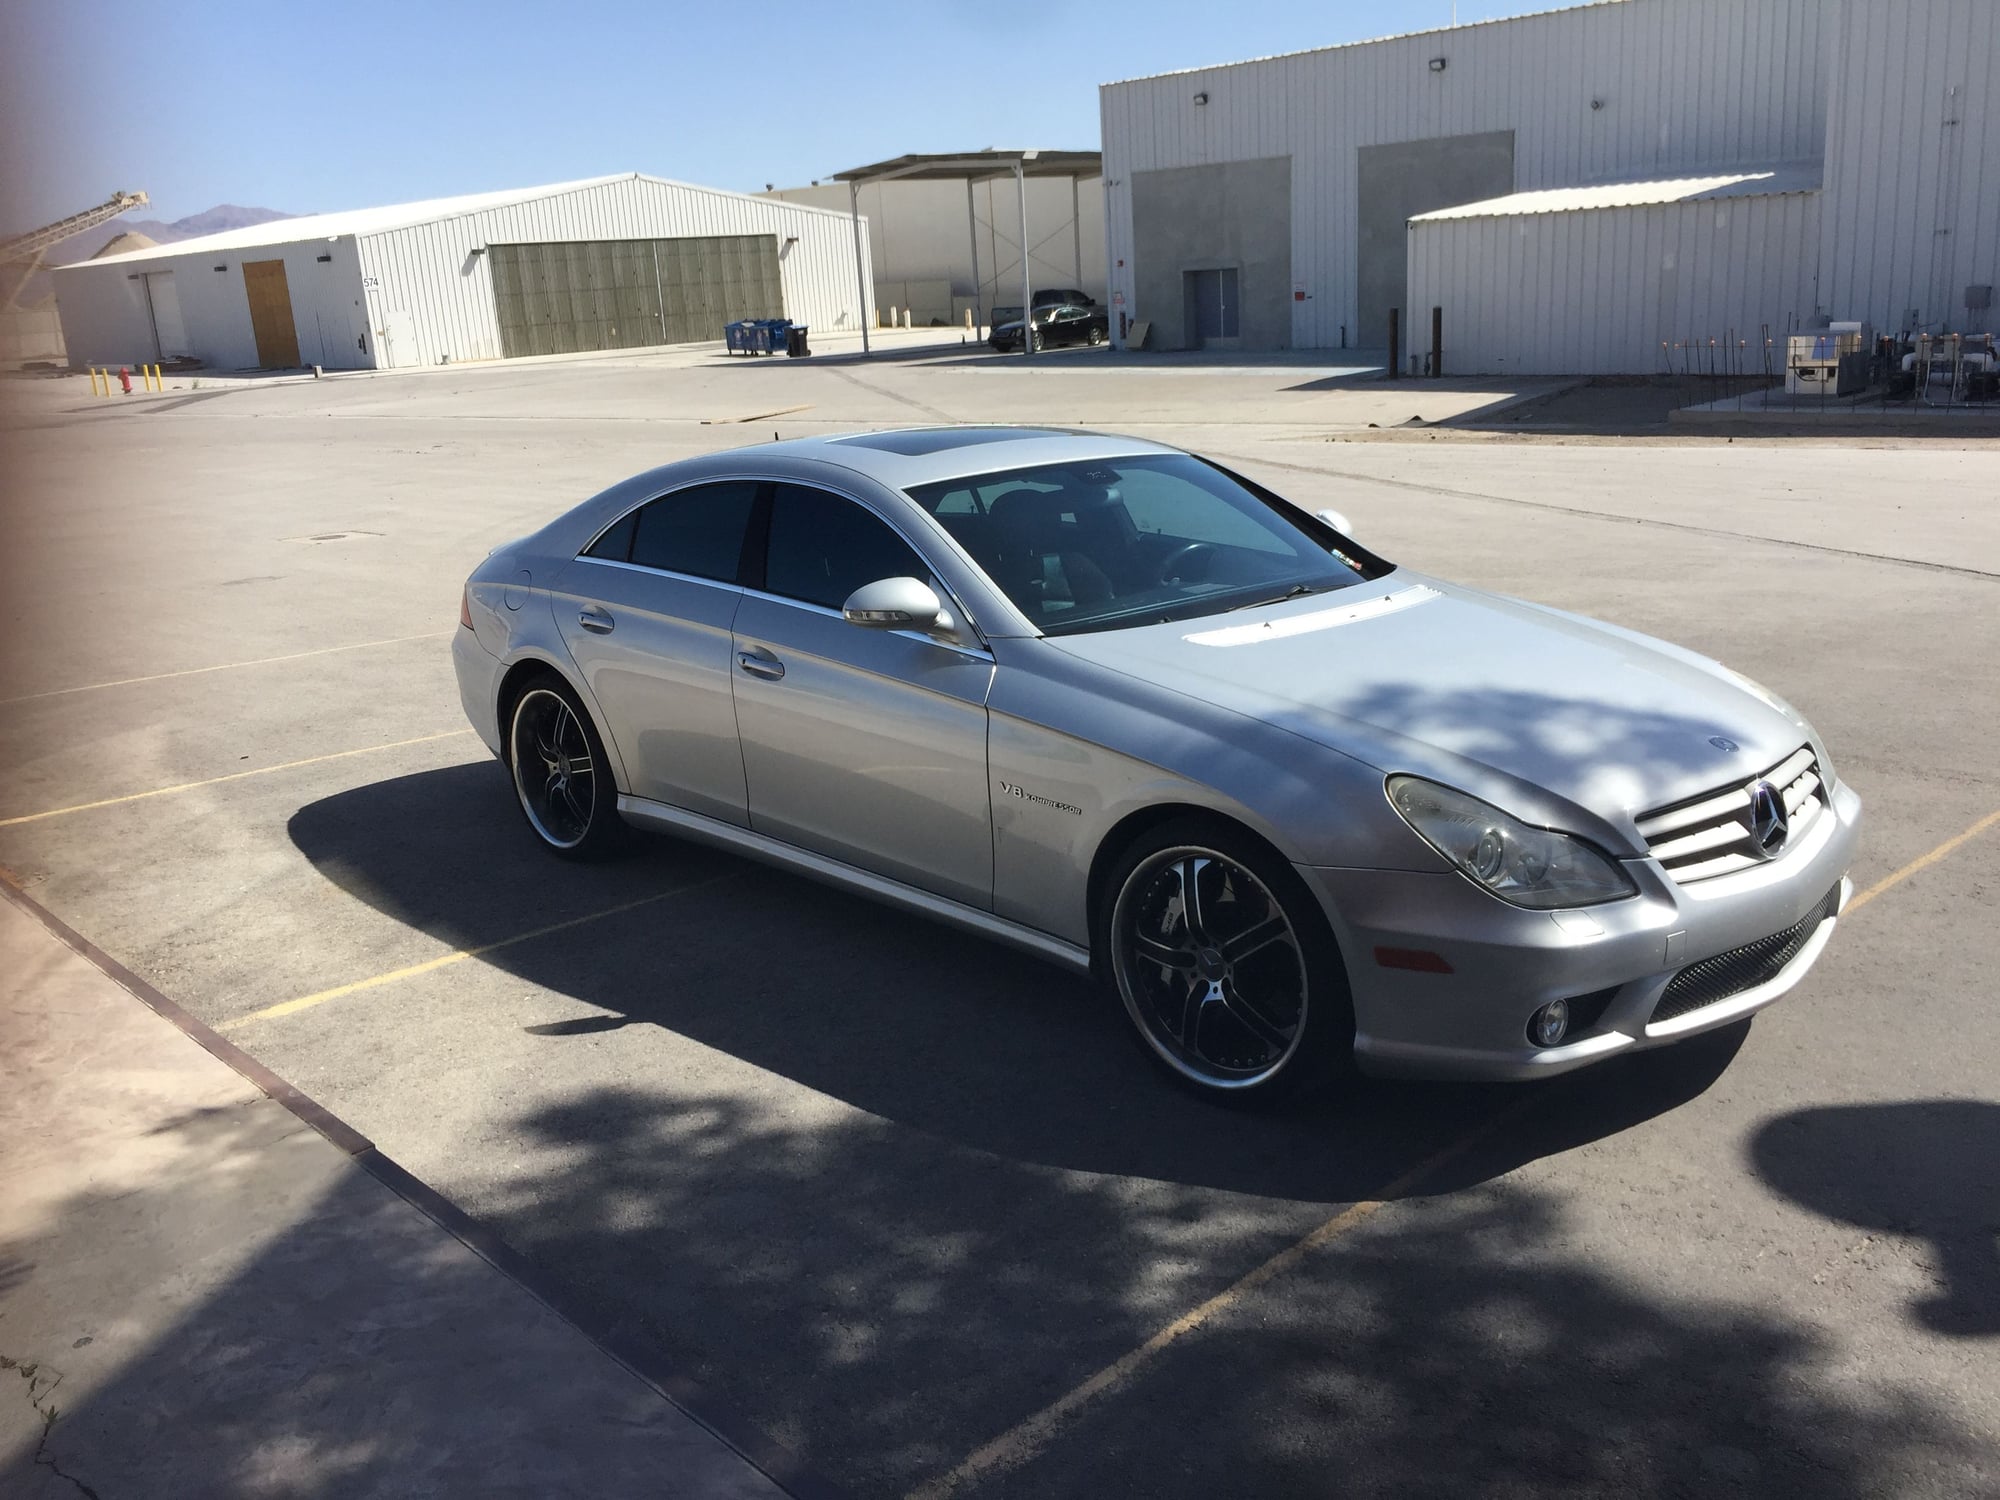 2006 Mercedes-Benz CLS55 AMG - 2006 CLS55 AMG P030 Performance Package CLS 55 - Used - VIN wdddj76x46a065017 - 119,000 Miles - 8 cyl - 2WD - Automatic - Sedan - Black - Las Vegas, NV 89131, United States